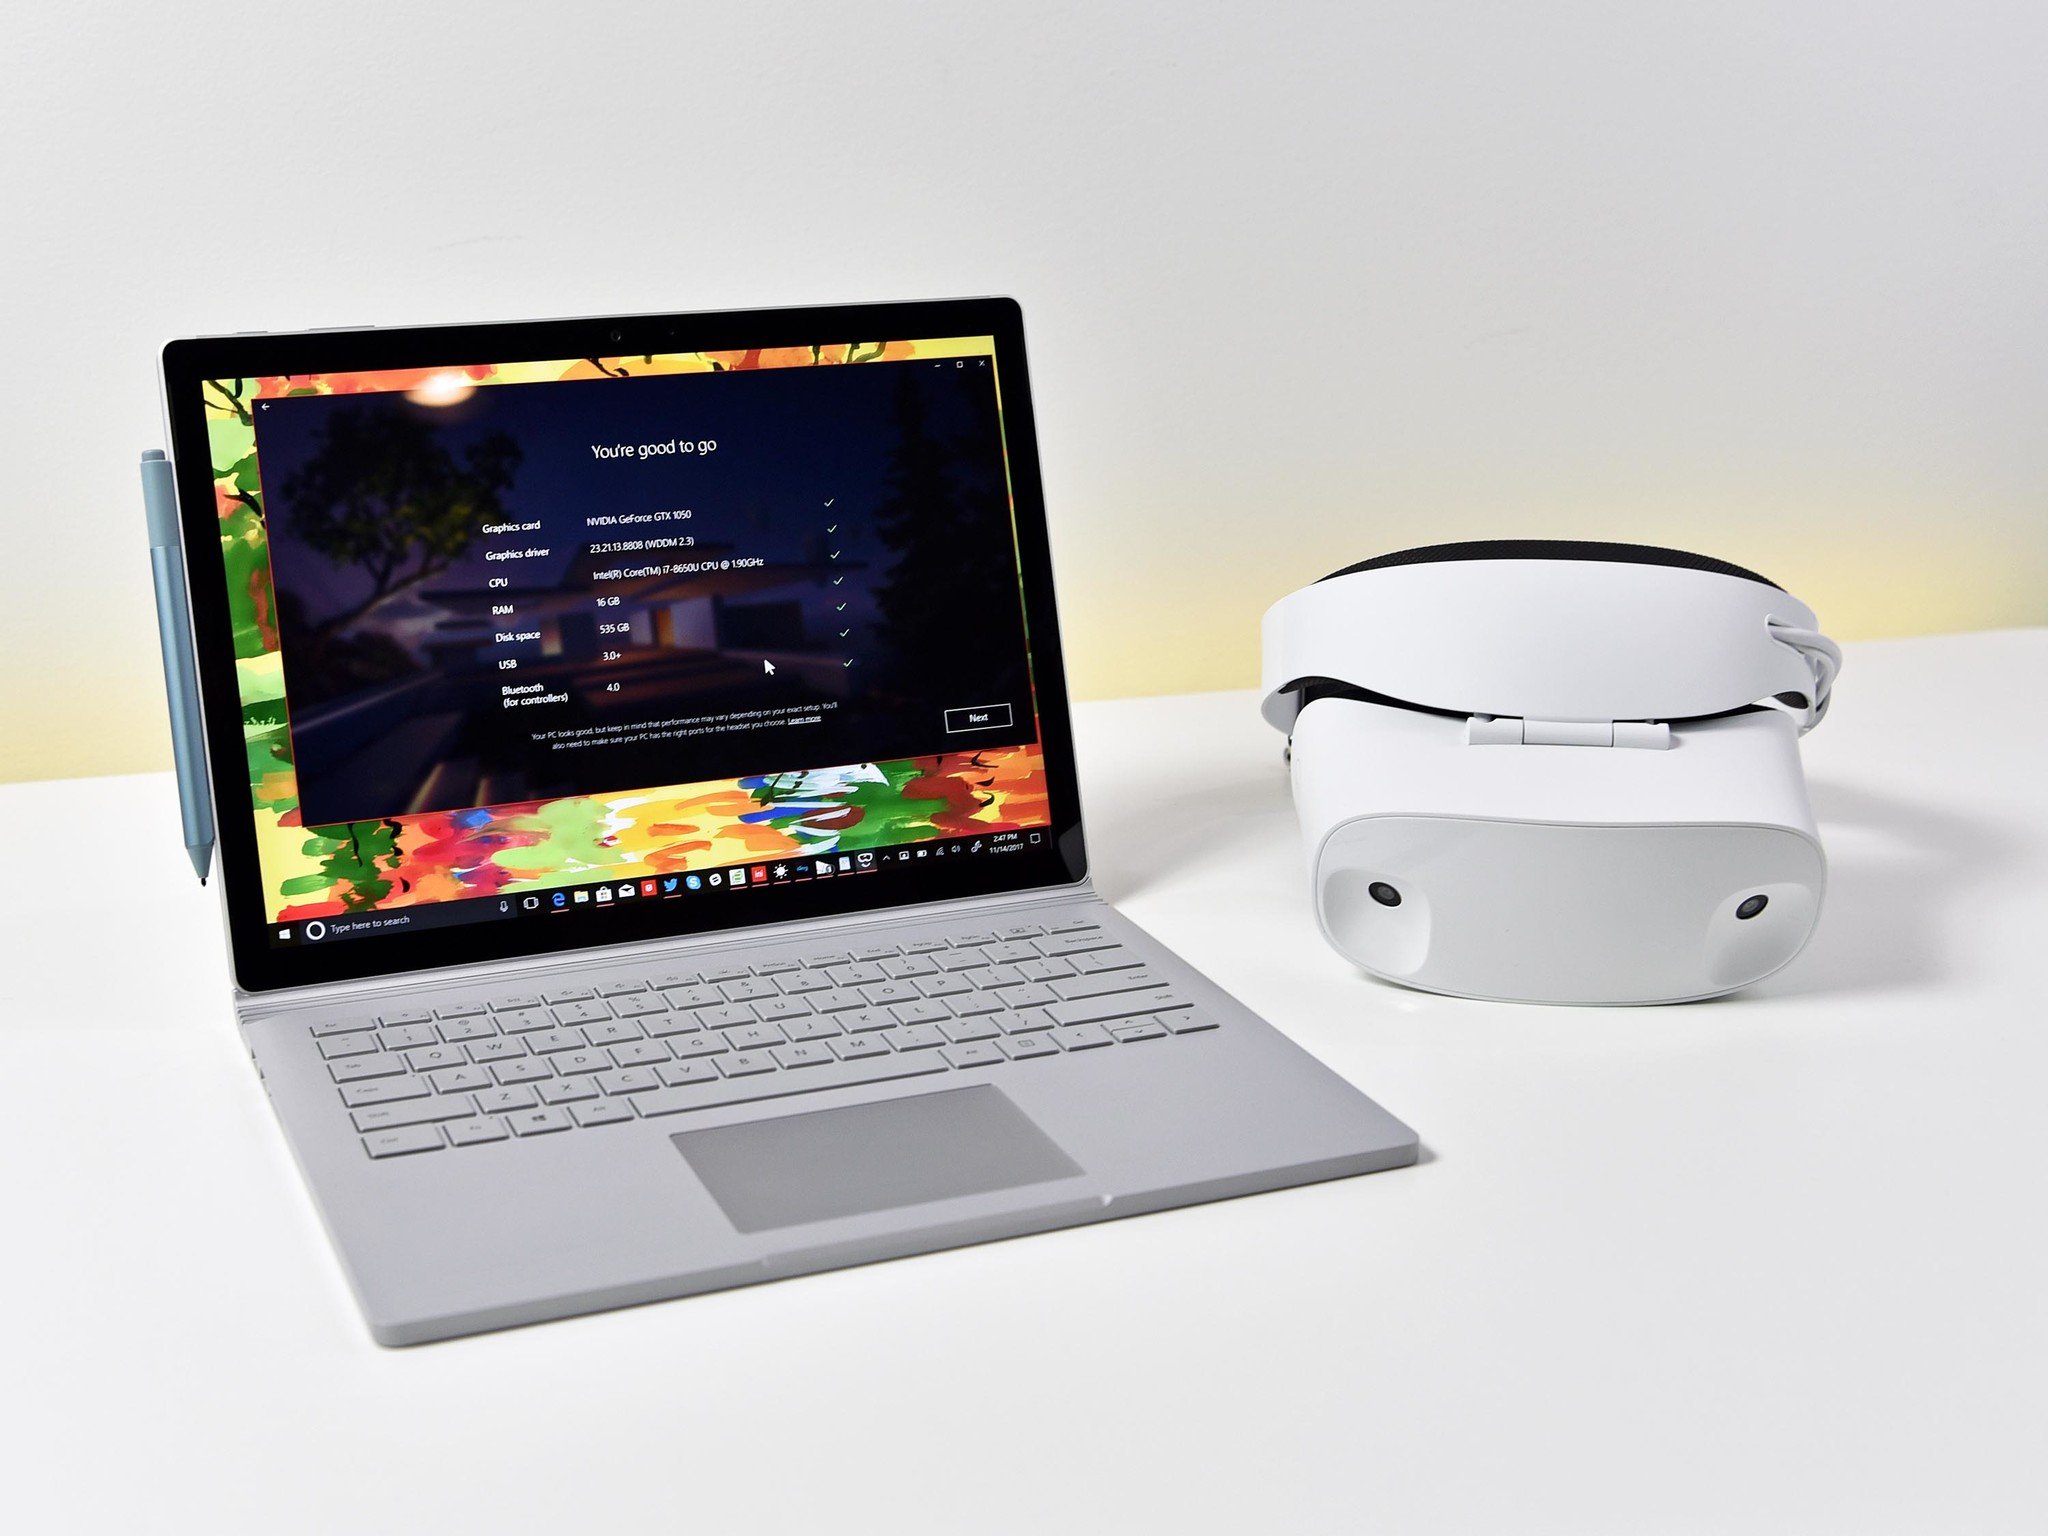 Save $400 on Surface Book 2 bundled with a Windows Mixed Reality headset 